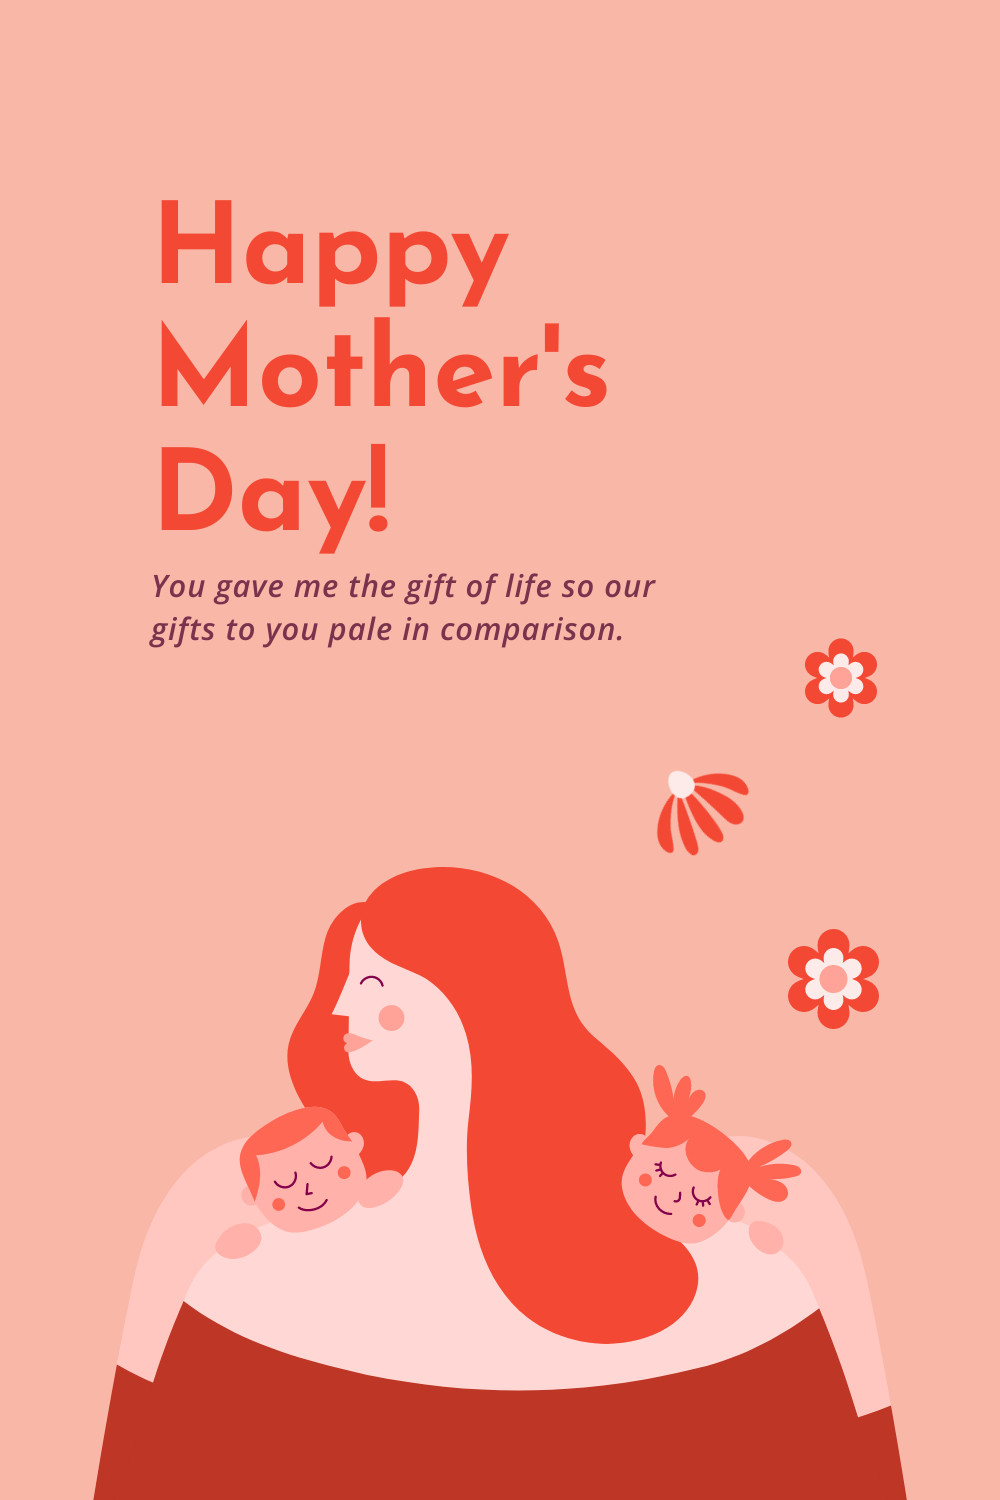 Mother's Day Gift of Life